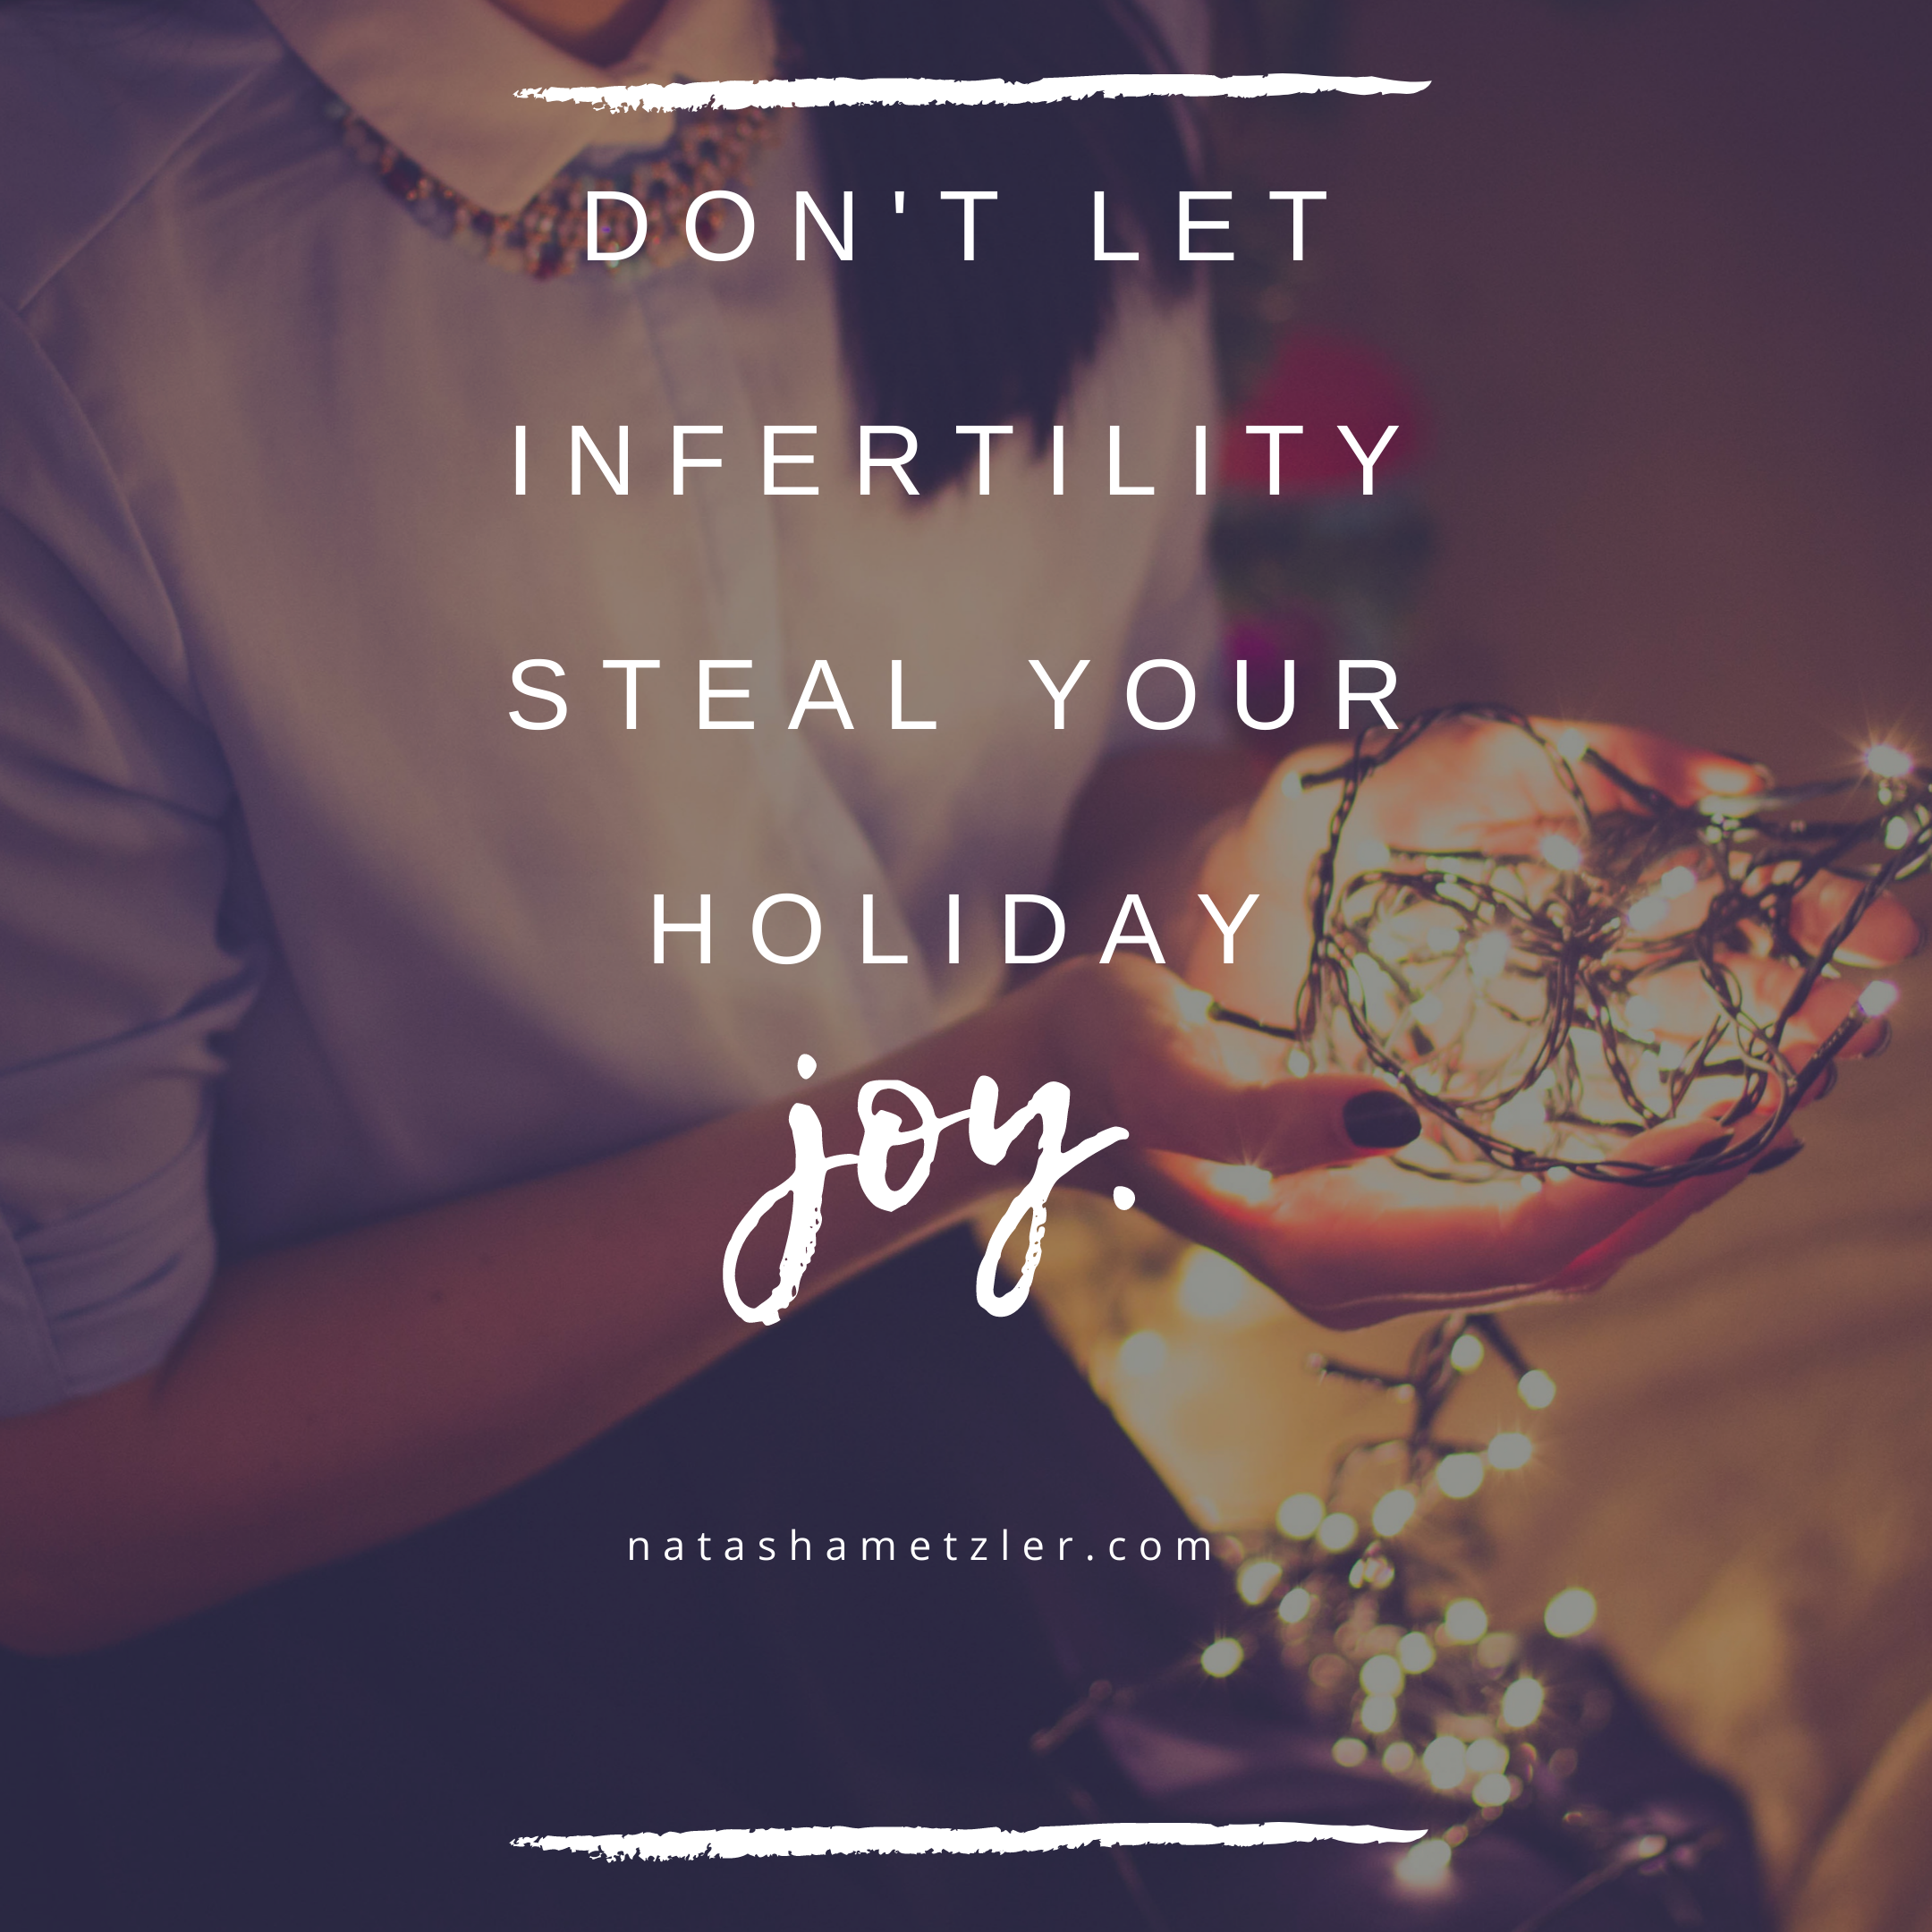 Don’t Let Infertility Steal Your Holiday Joy